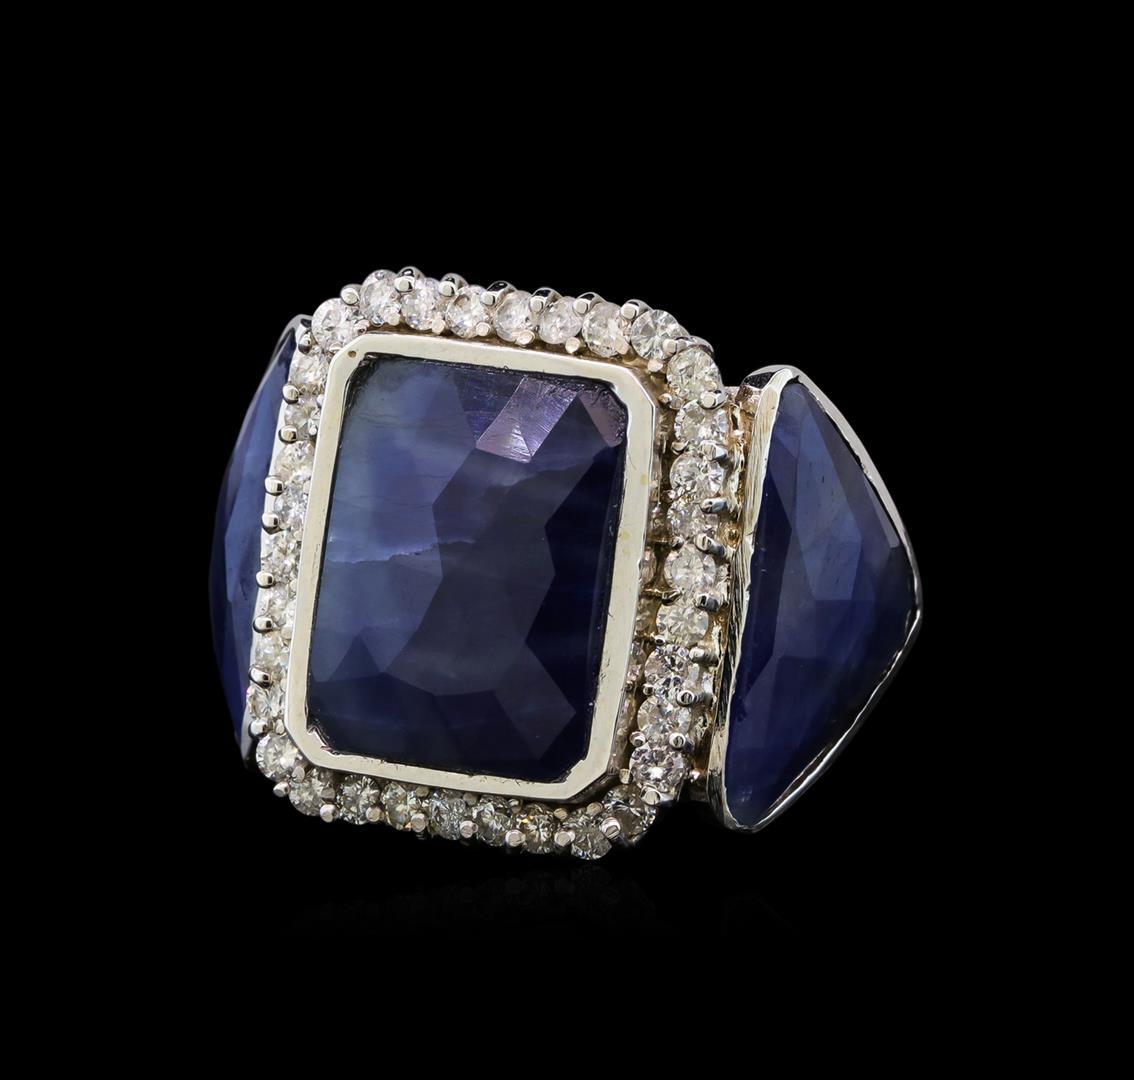 14KT White Gold 20.59 ctw Sapphire and Diamond Ring